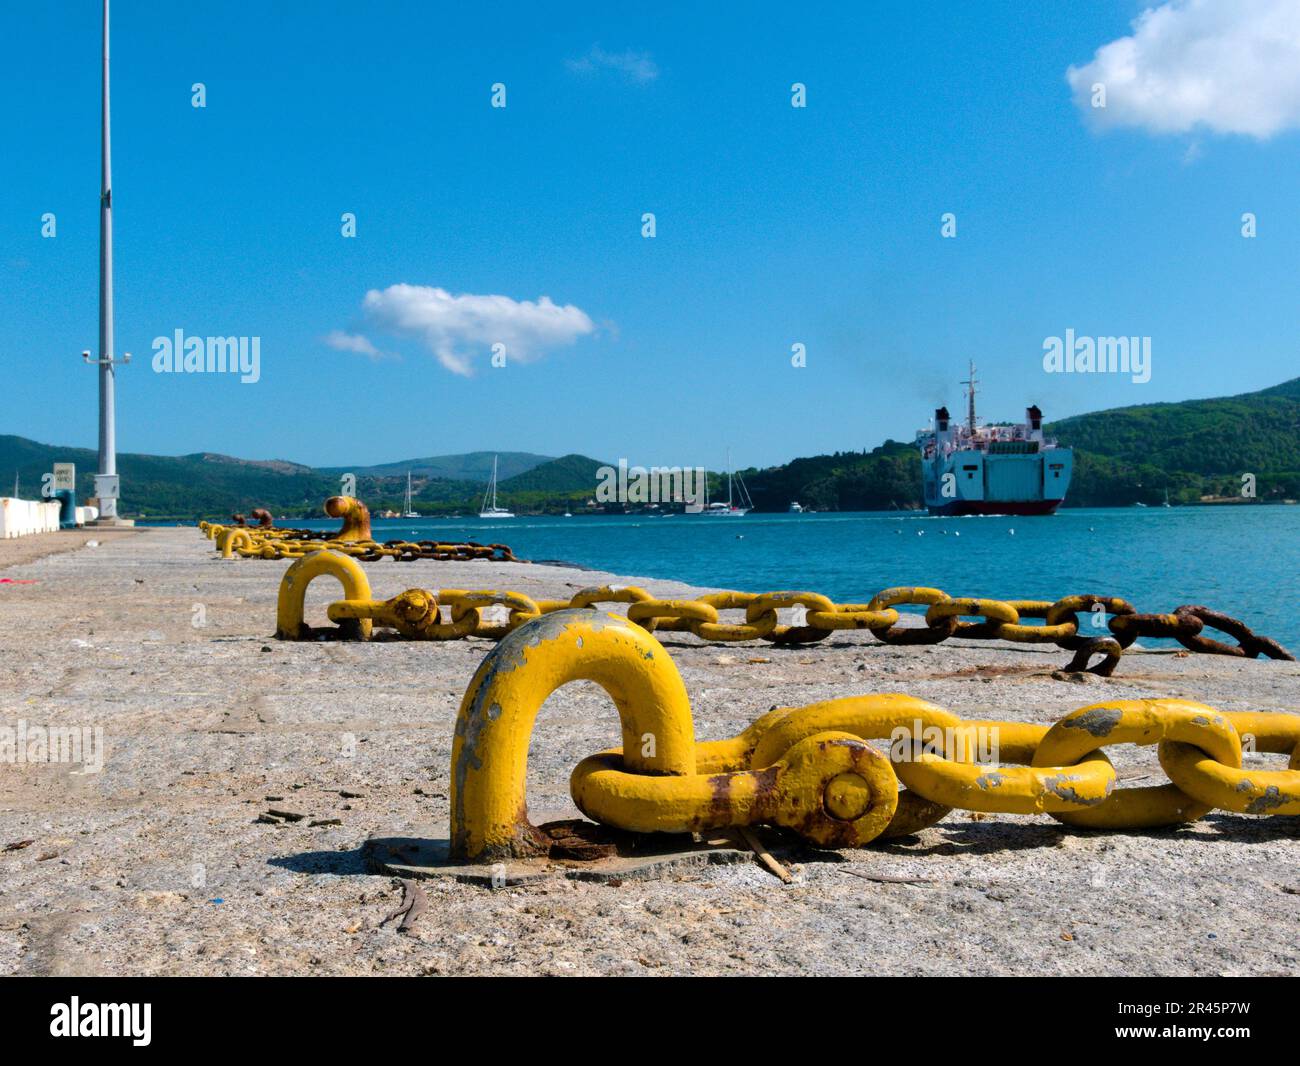 A vibrant yellow mooring and chain lay in the foreground of a scenic landscape Stock Photo